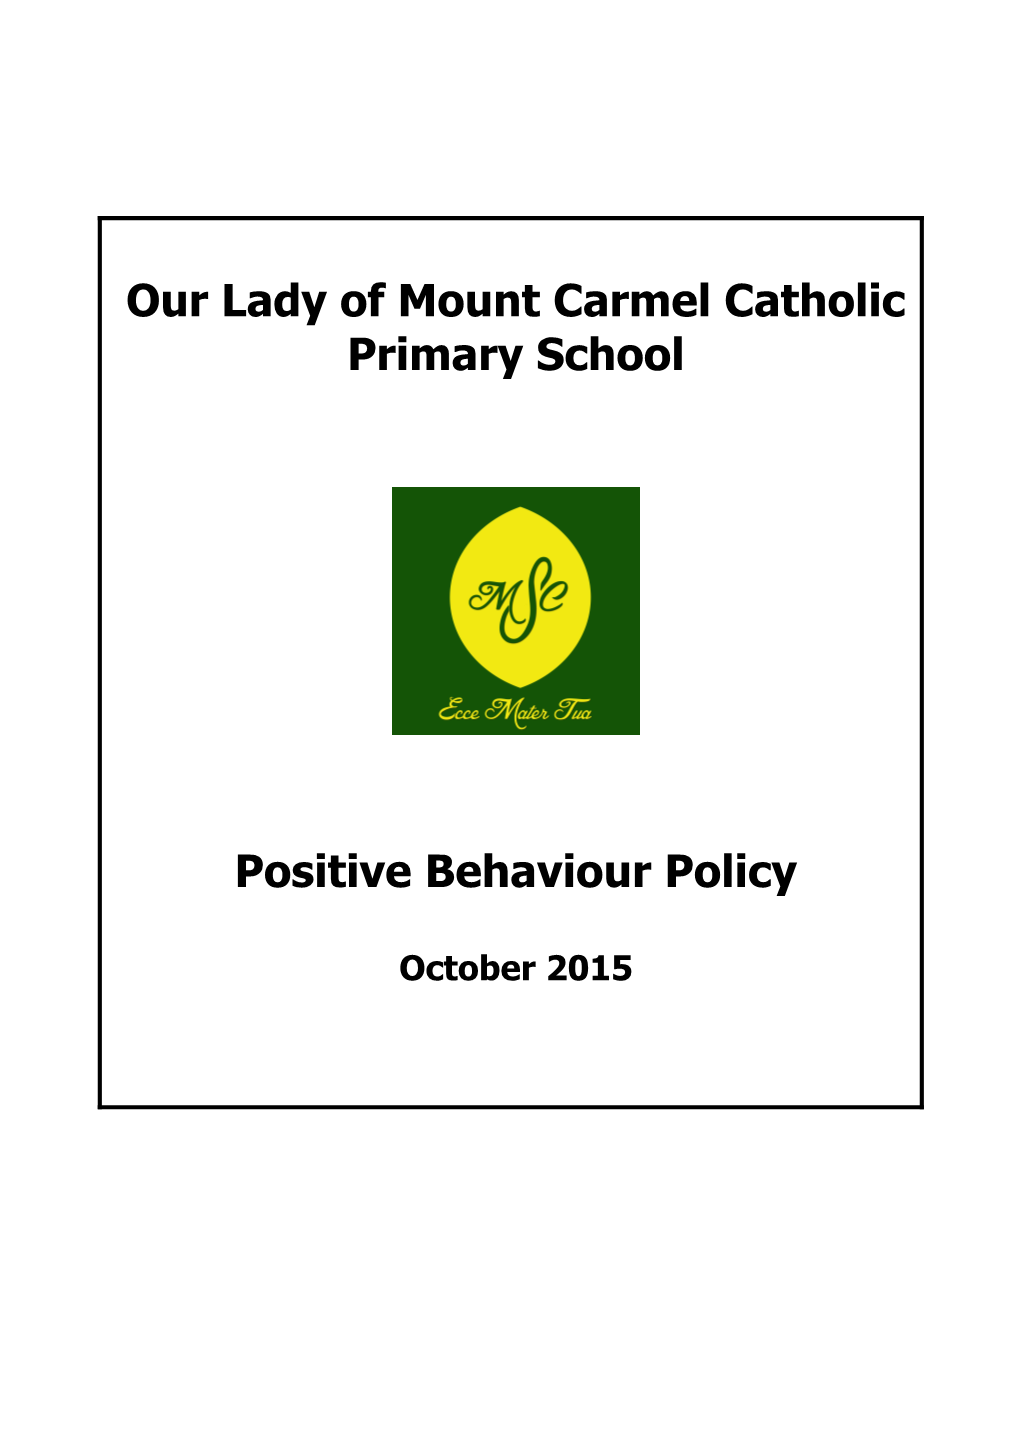 Our Lady of Mount Carmel Primary School